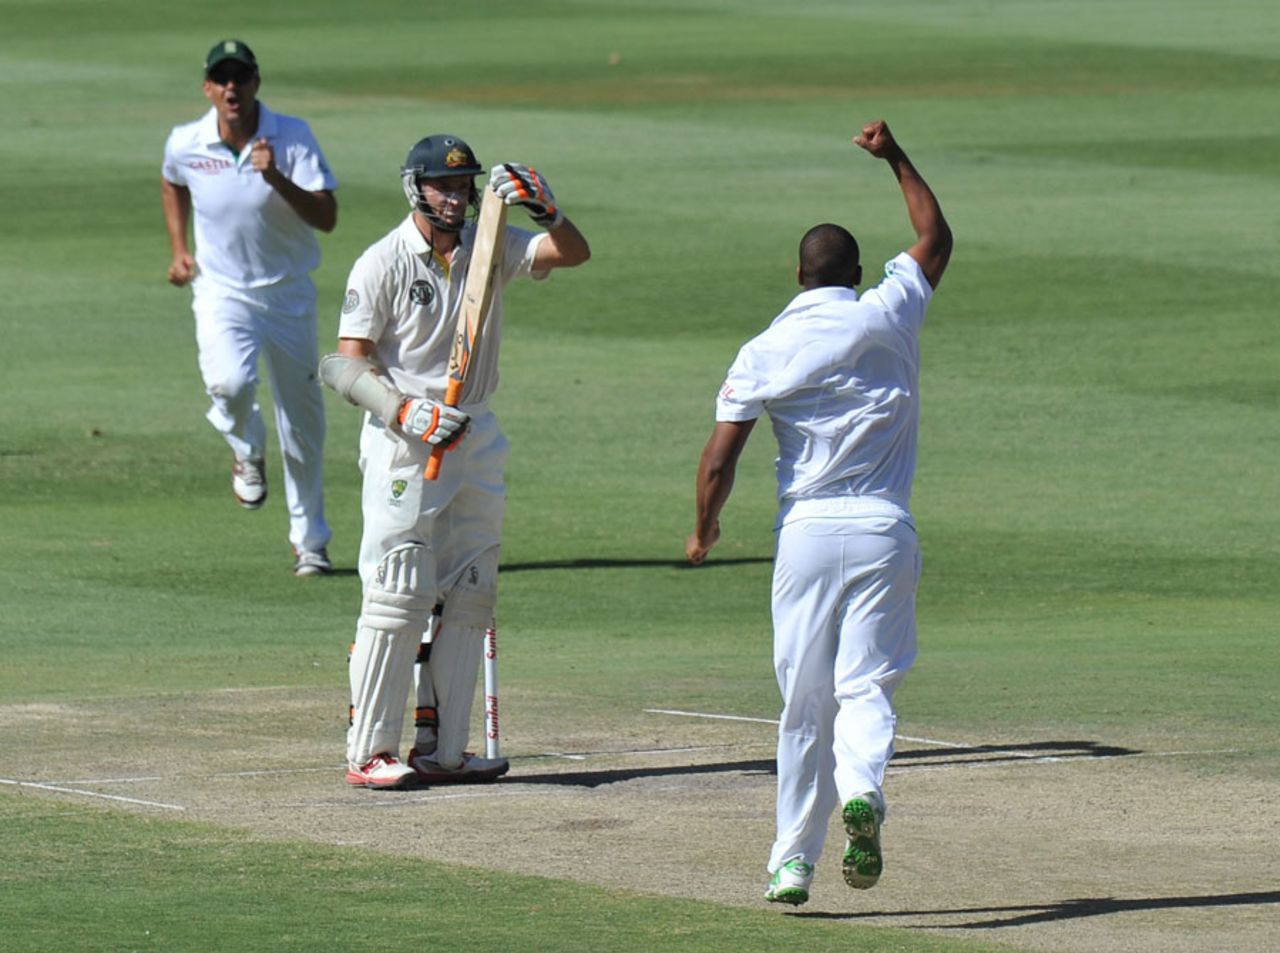 Michael Hussey unsuccessfully reviews the lbw decision against him, South Africa v Australia, 2nd Test, Johannesburg, 5th day, November 21, 2011